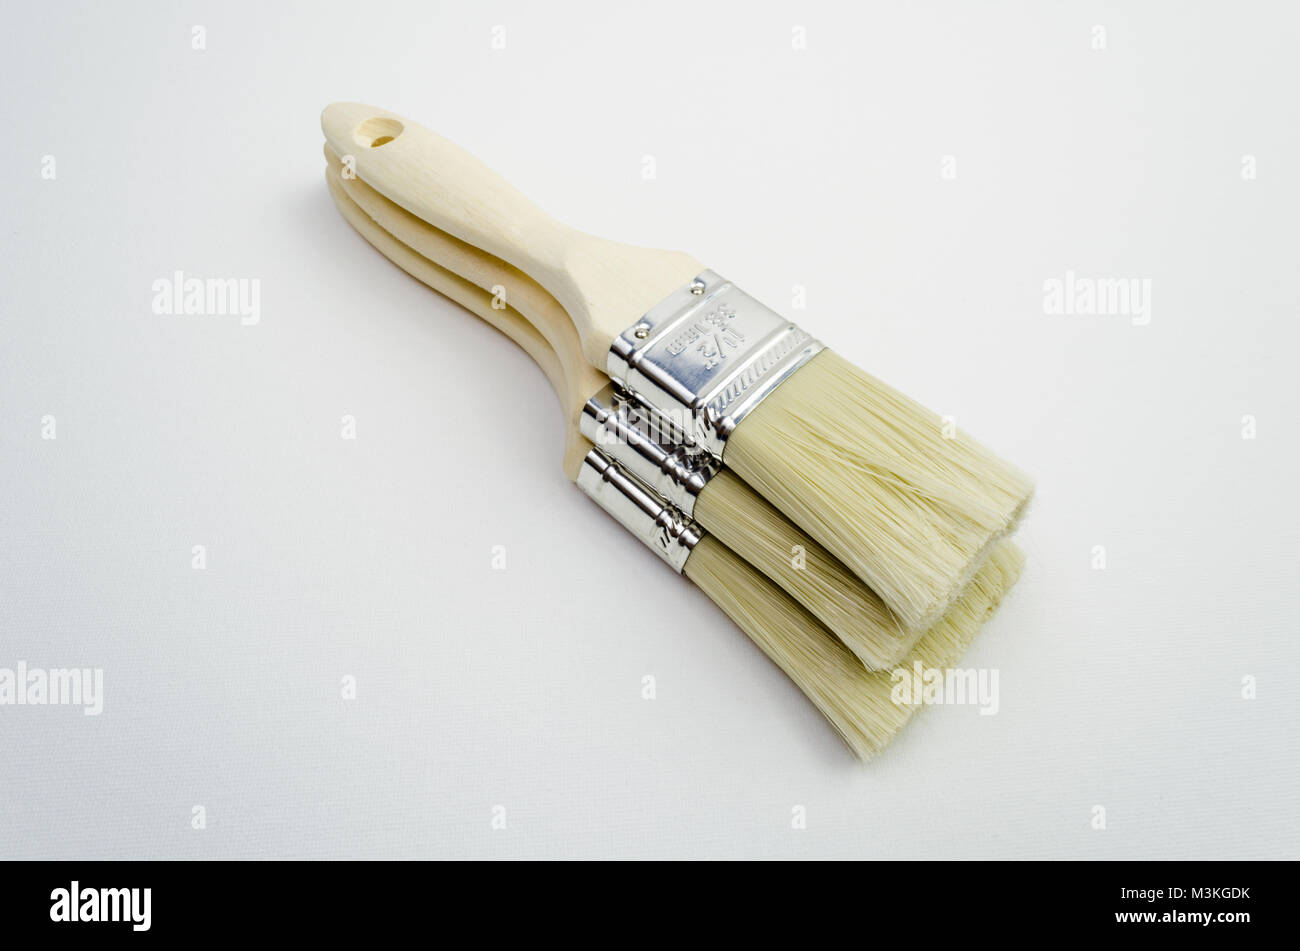 A Studio Photograph of Three Wooden Handled Paintbrushes Stock Photo